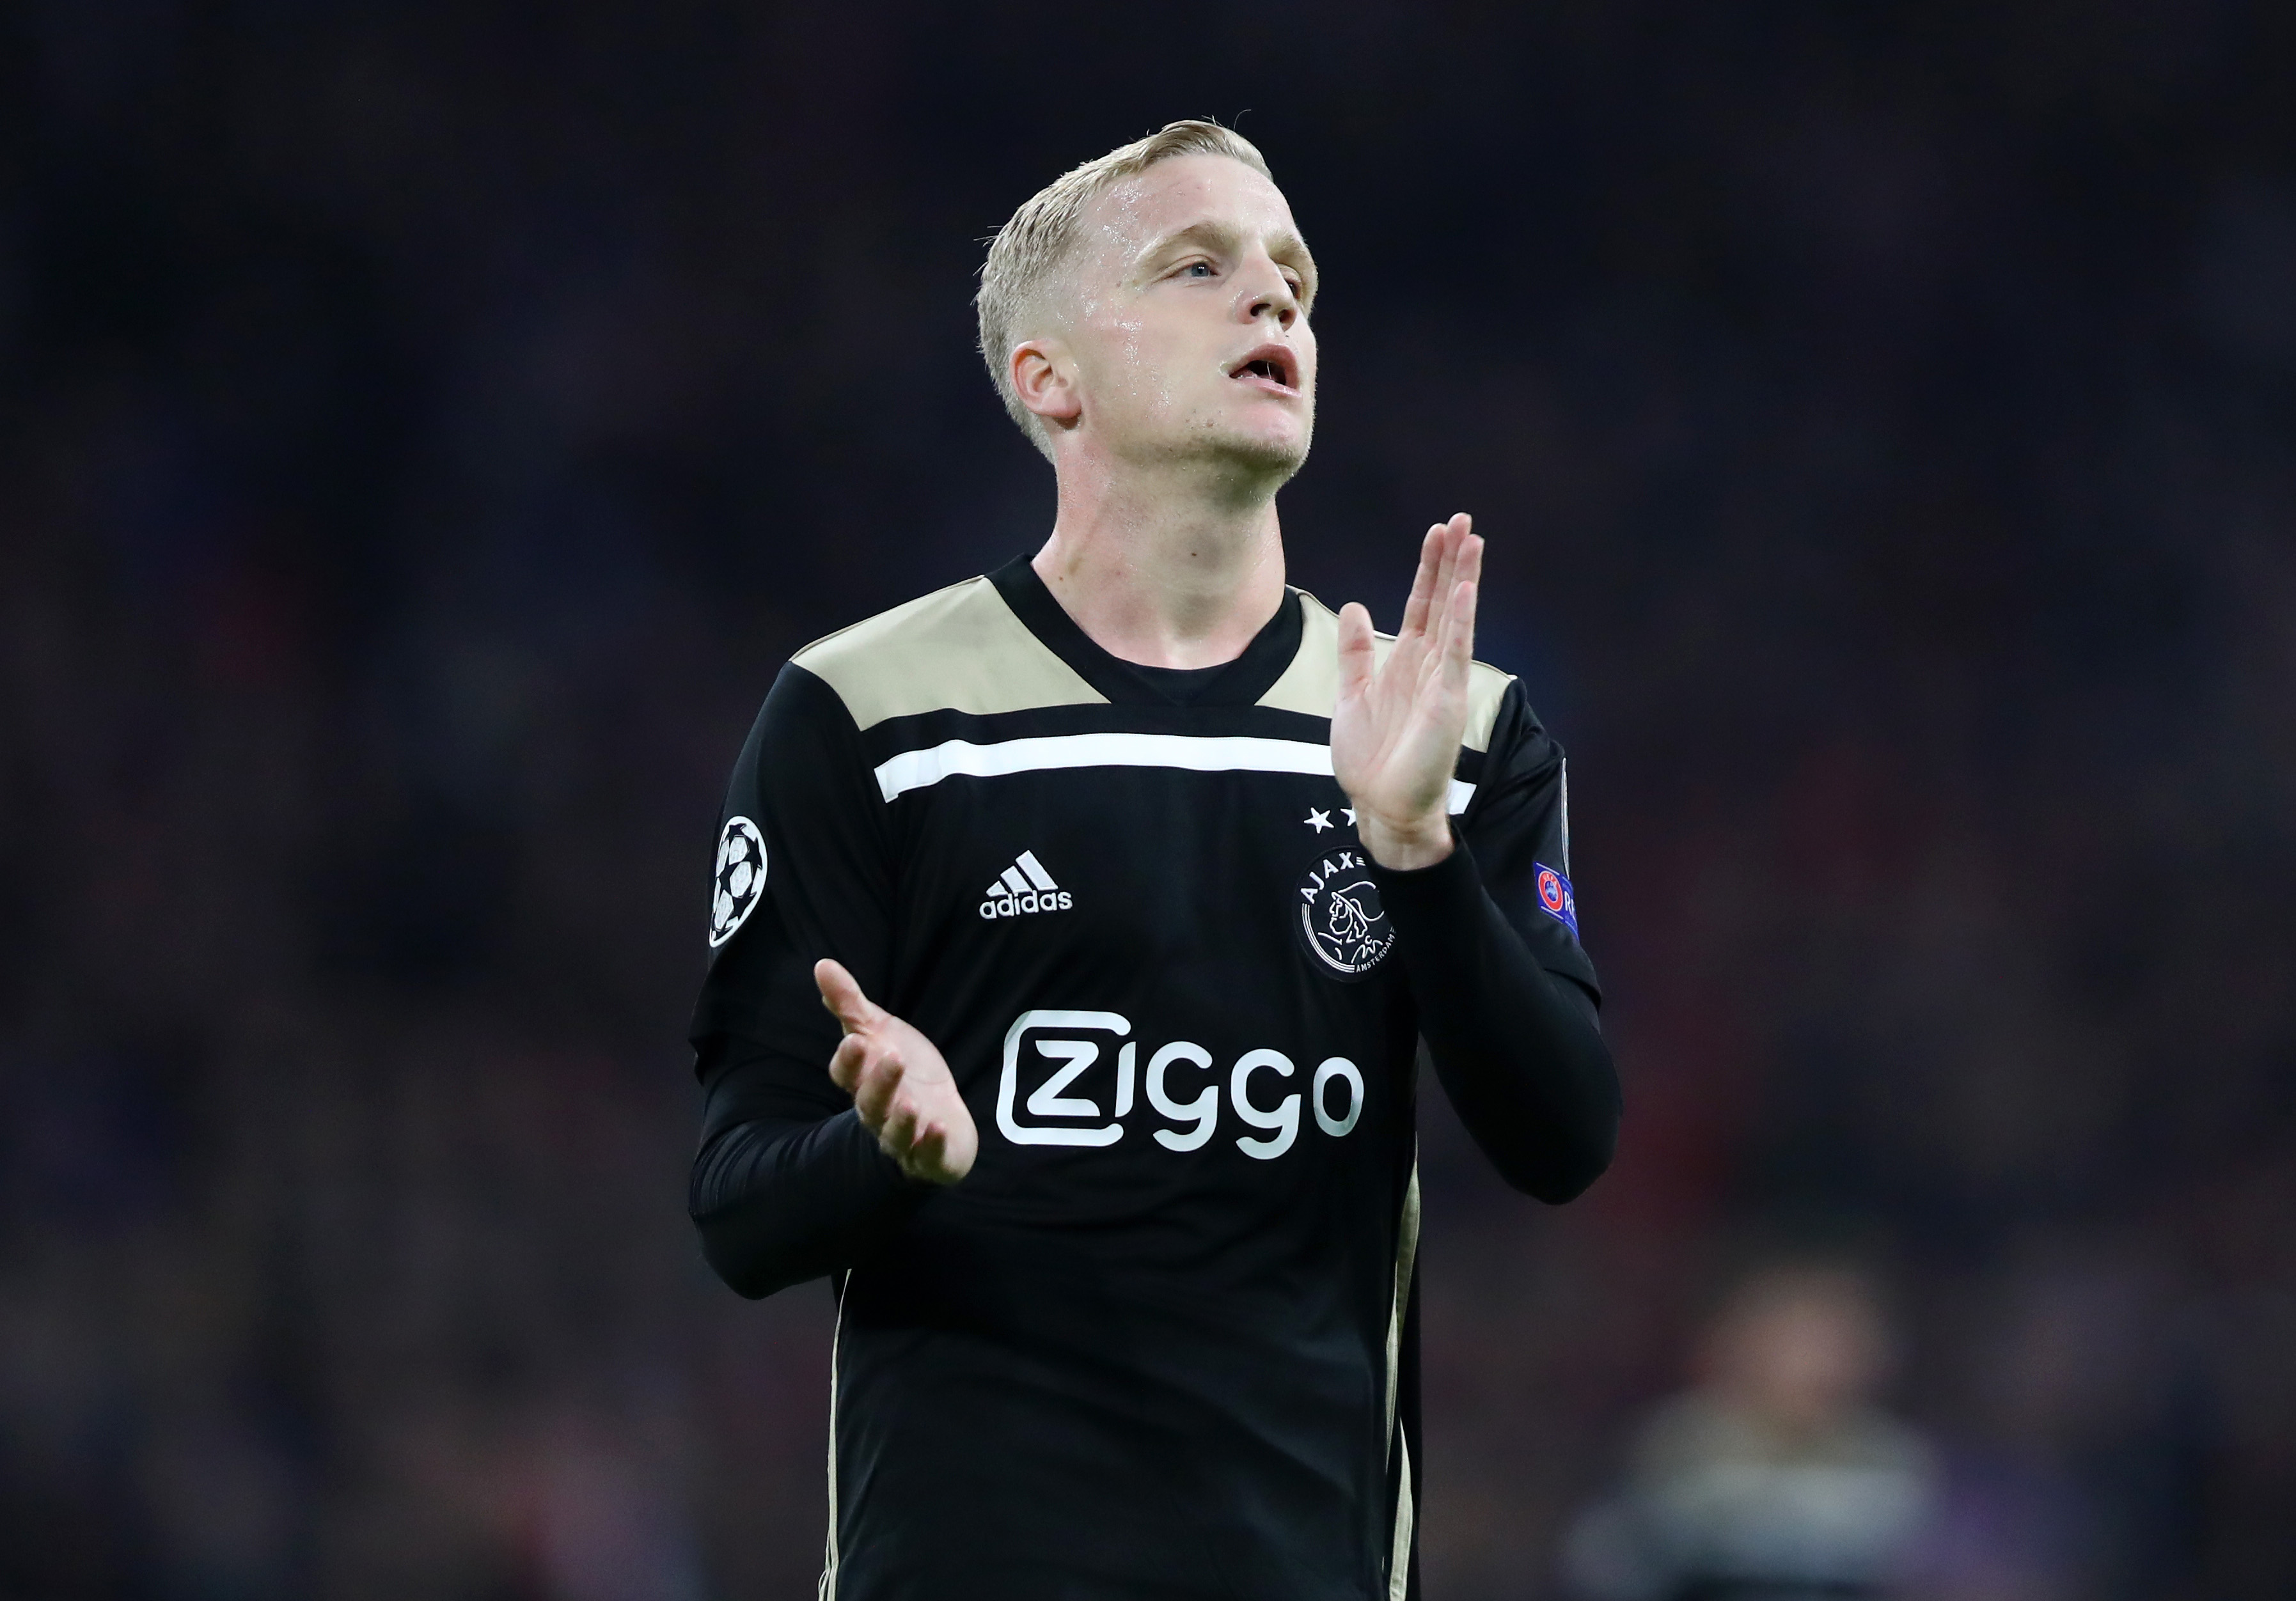 Could van de Beek be turning out for one of his Champions League victims soon? (Photo by Dean Mouhtaropoulos/Getty Images)